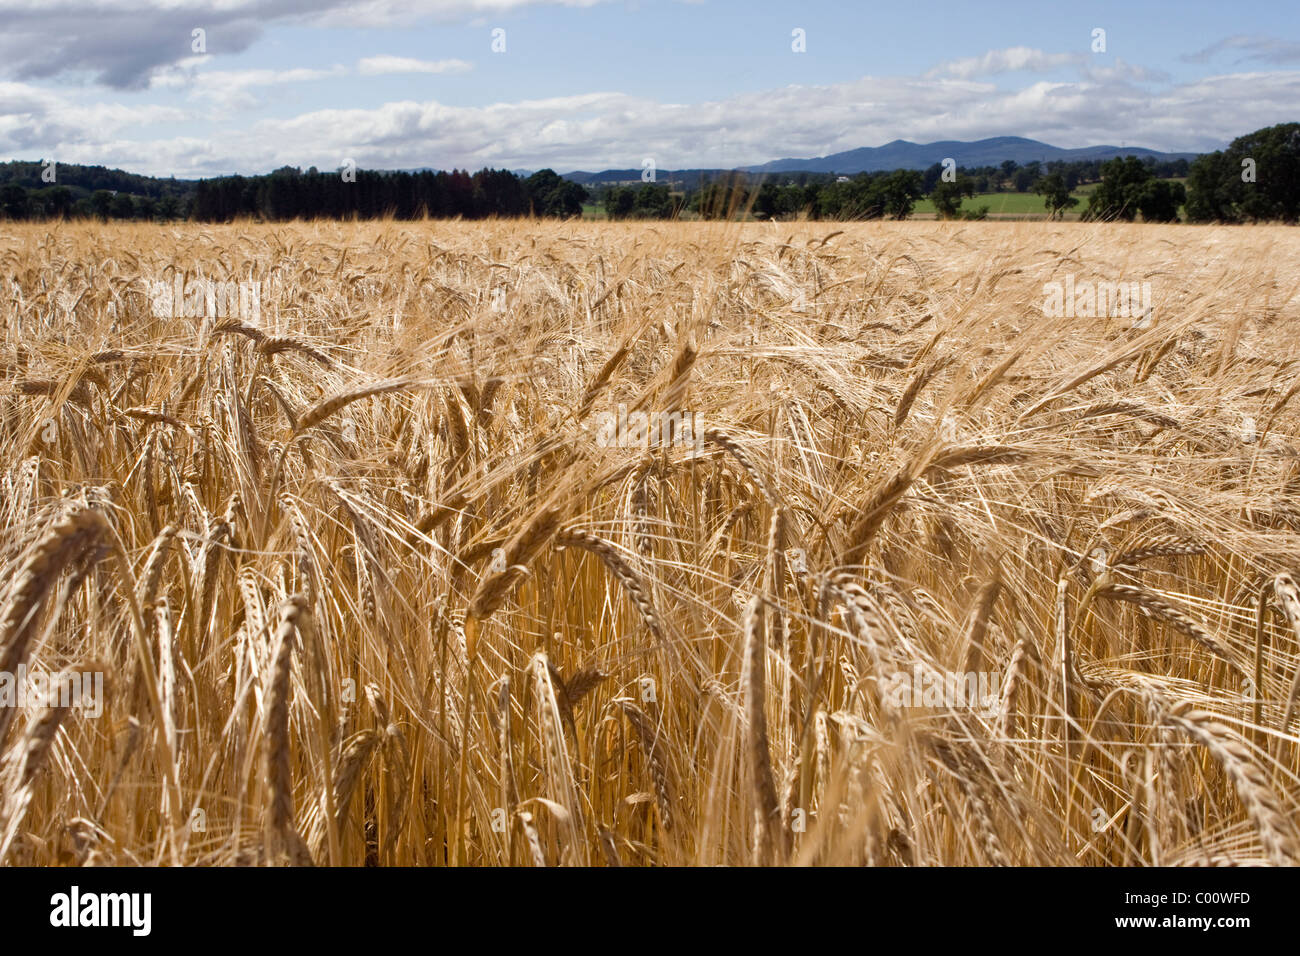 Barley field at harvest time Stock Photo